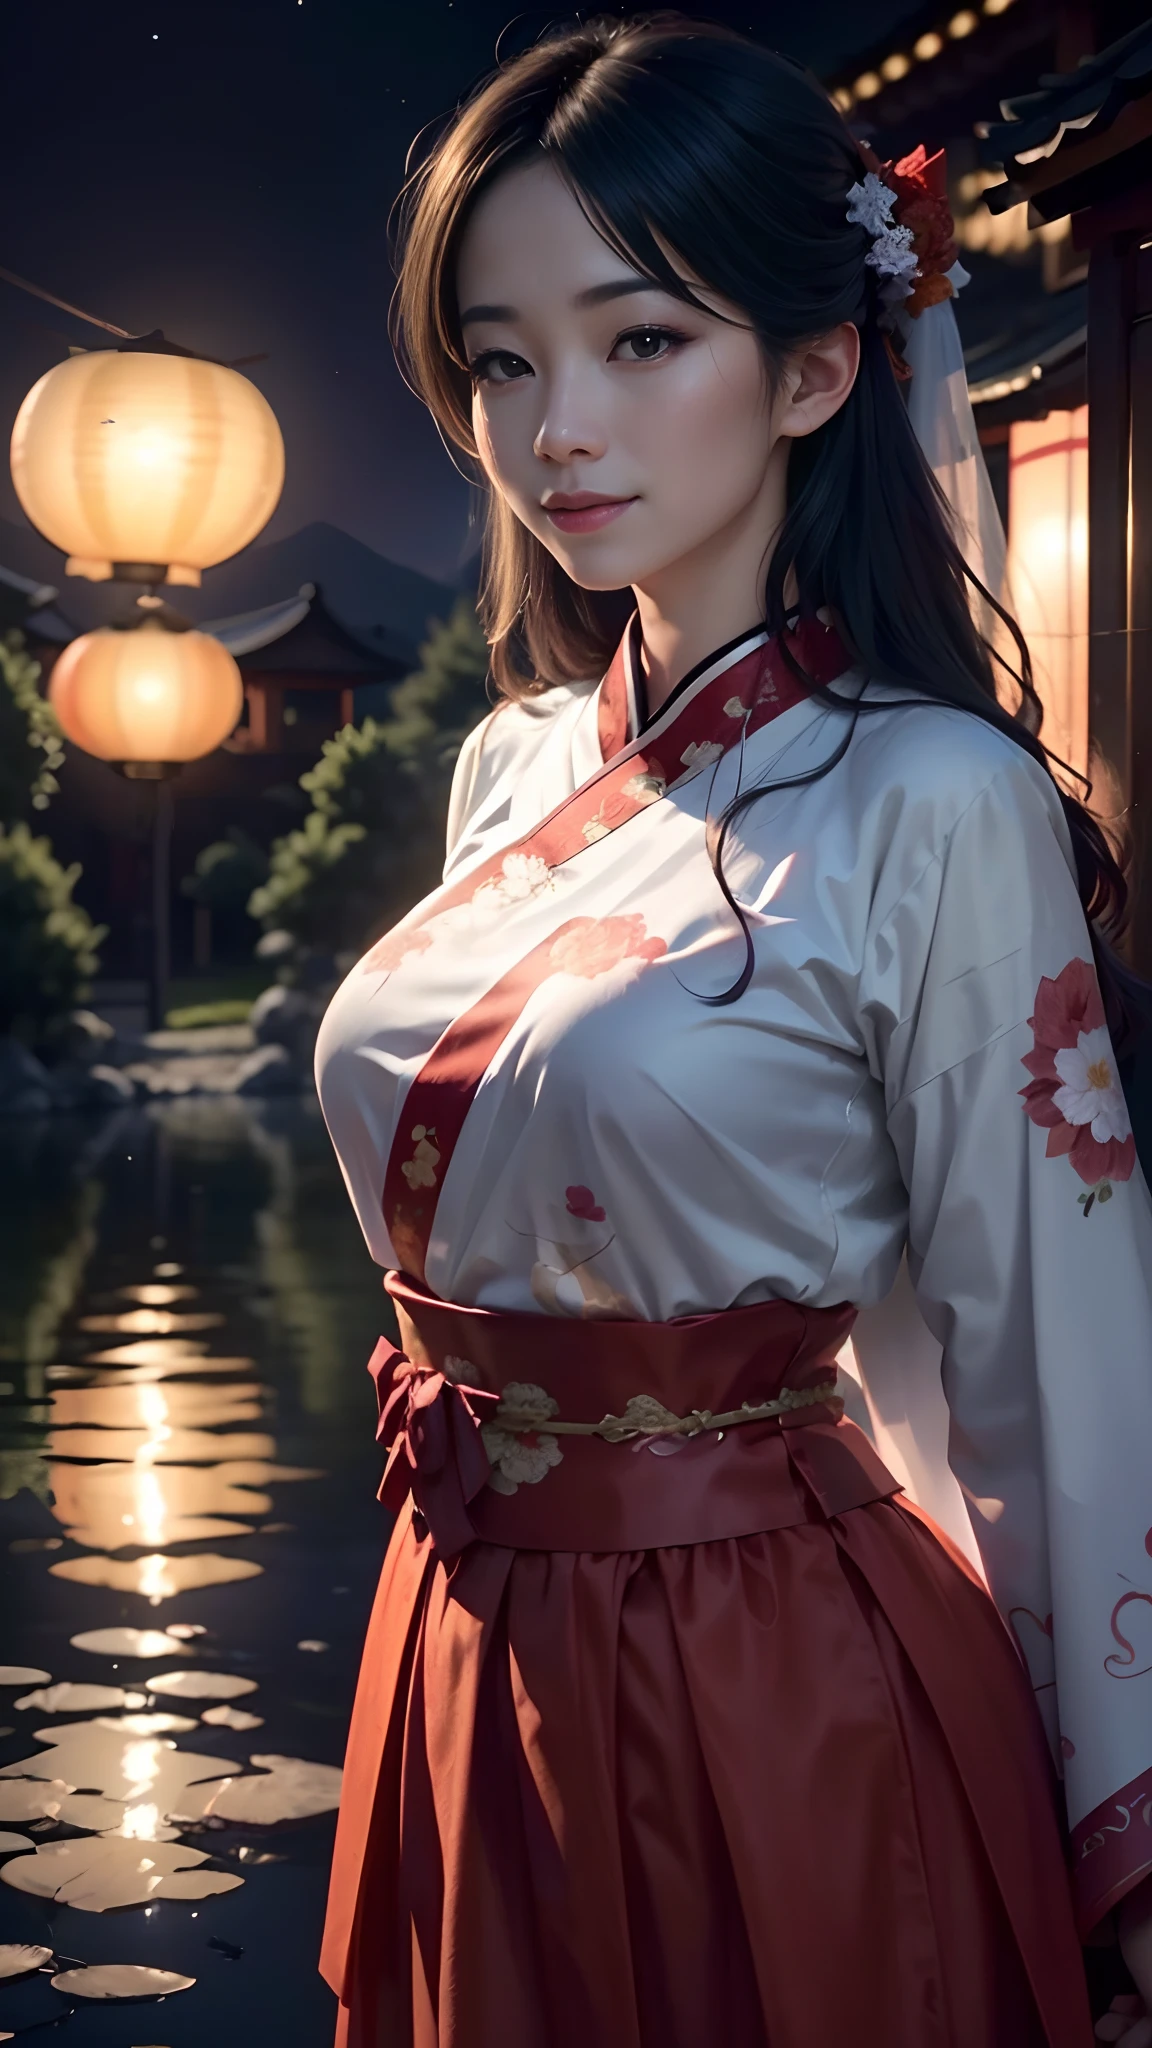 (Best quality,4K,8K,A high resolution,Masterpiece:1.2),Ultra-detailed,(Realistic,Photorealistic,photo-realistic:1.37),Painting,landscape,Autumn,traditional Chinese festivals,Chinese lanterns,Bright scene,Vivid colors,detailed scenic view,full moon,Lush gardens,Crimson sky,Tranquil atmosphere,traditional architecture,artistic rendition,traditionalcostumes,Delicious mooncakes,Lovely lanterns,peaceful night,celebrating,a joyful atmosphere,Distant mountains,Gentle breeze,glowing candles,Community gatherings,The moonlight casts soft shadows,Traditional music,mystical ambiance,colorful adornments,reflection on the lake,Serene face,Enjoy lantern riddles,Admire the full moon,Full of happiness,Family reunion,Unity and harmony.Perfectcomposition